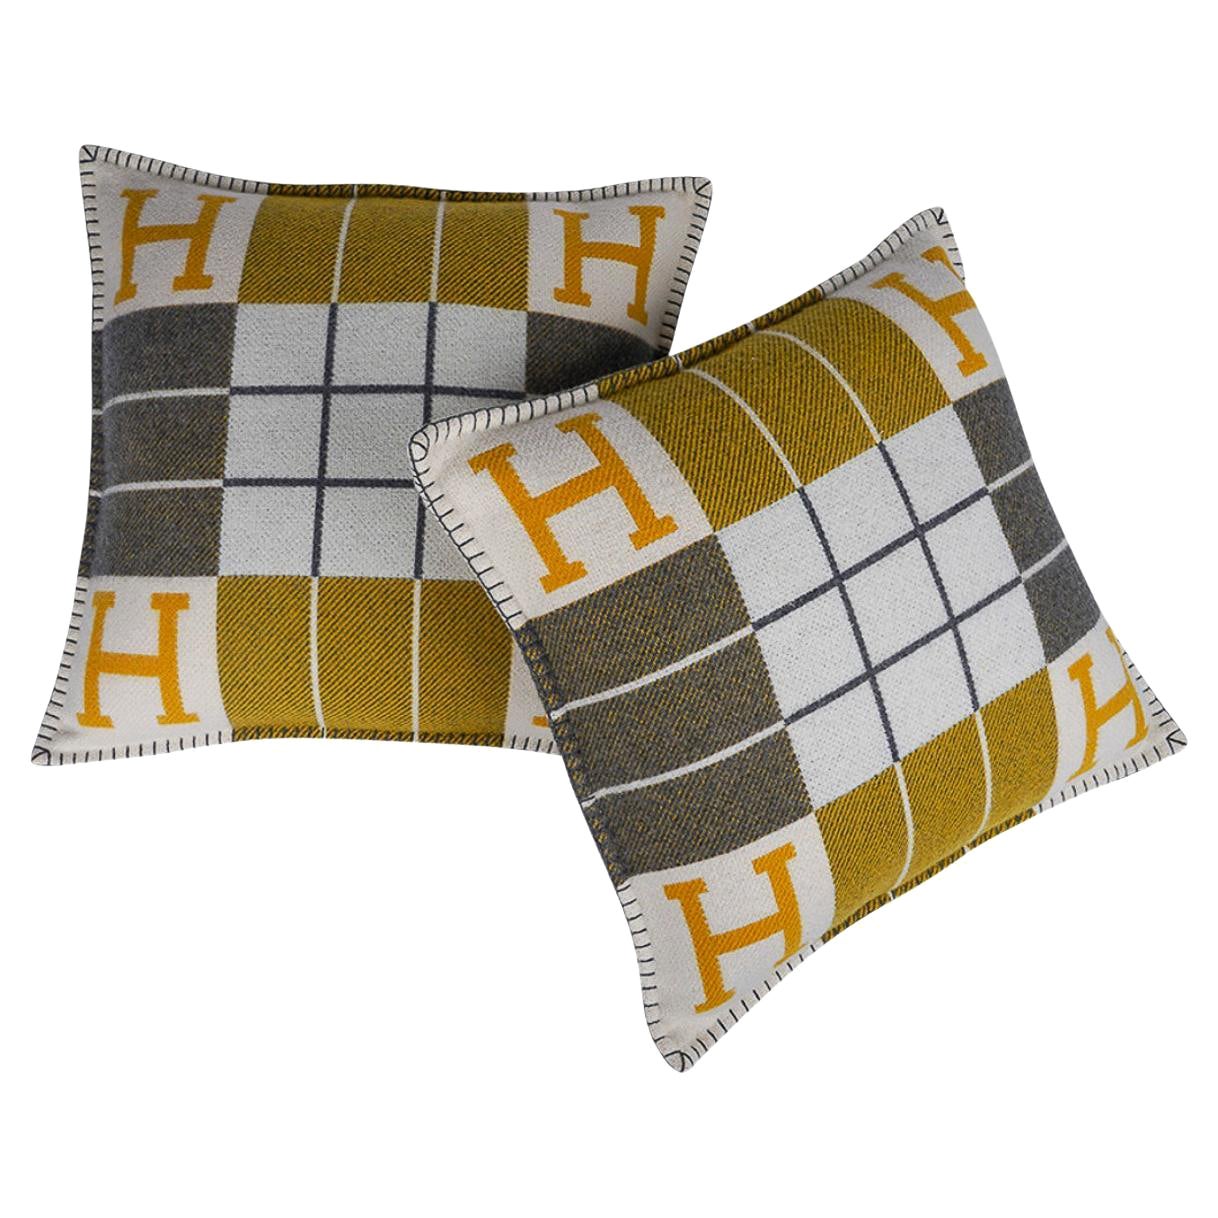 Hermes Cushion Avalon III Soleil / Gris Small Model Throw Pillow Set of Two